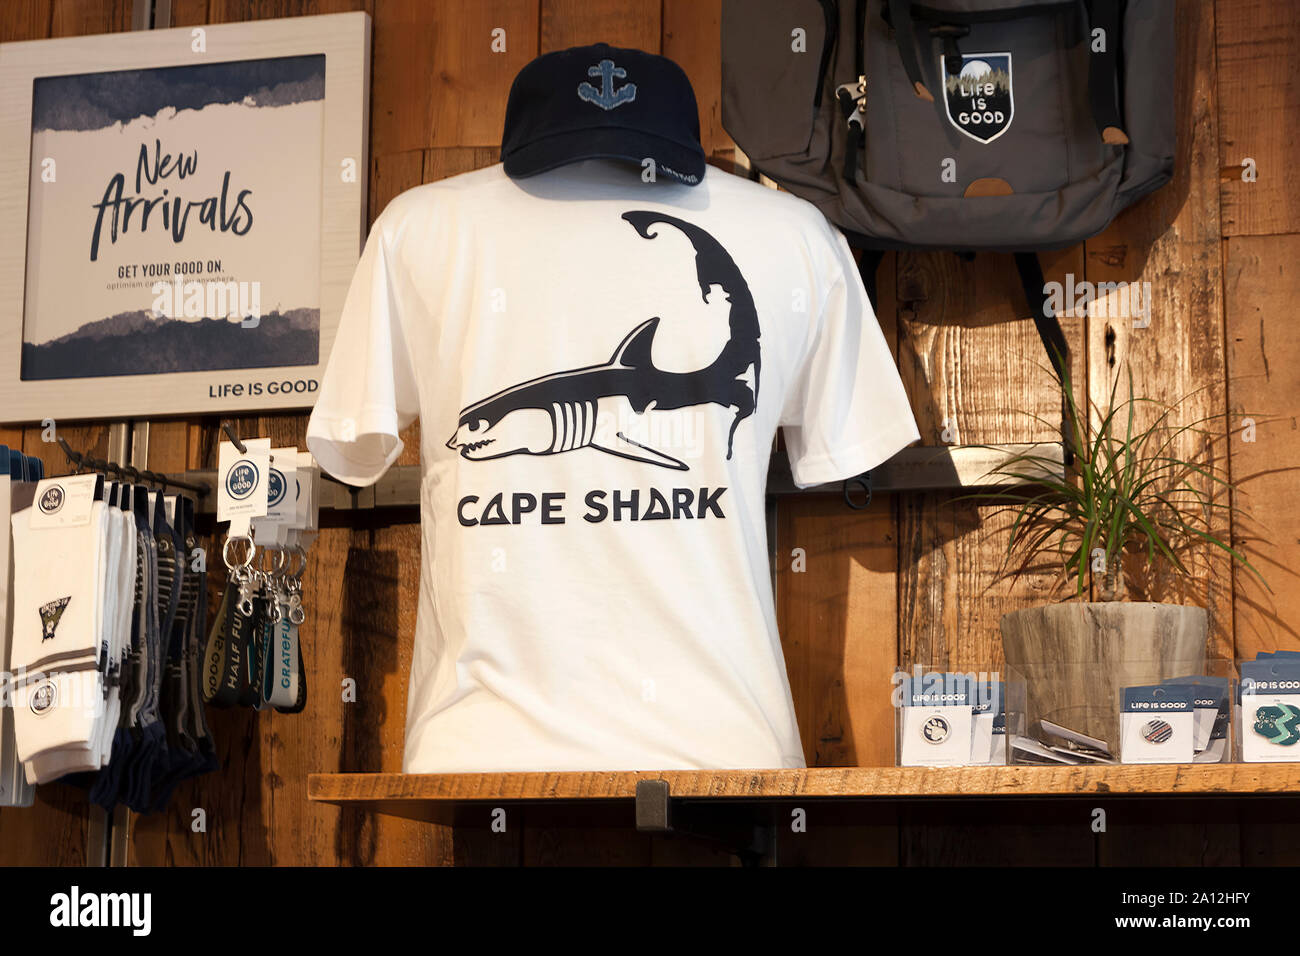 Shark themed tee-shirt and cap for sale on a store shelf in Chatham, Massachusetts, Cape Cod, United States. Stock Photo